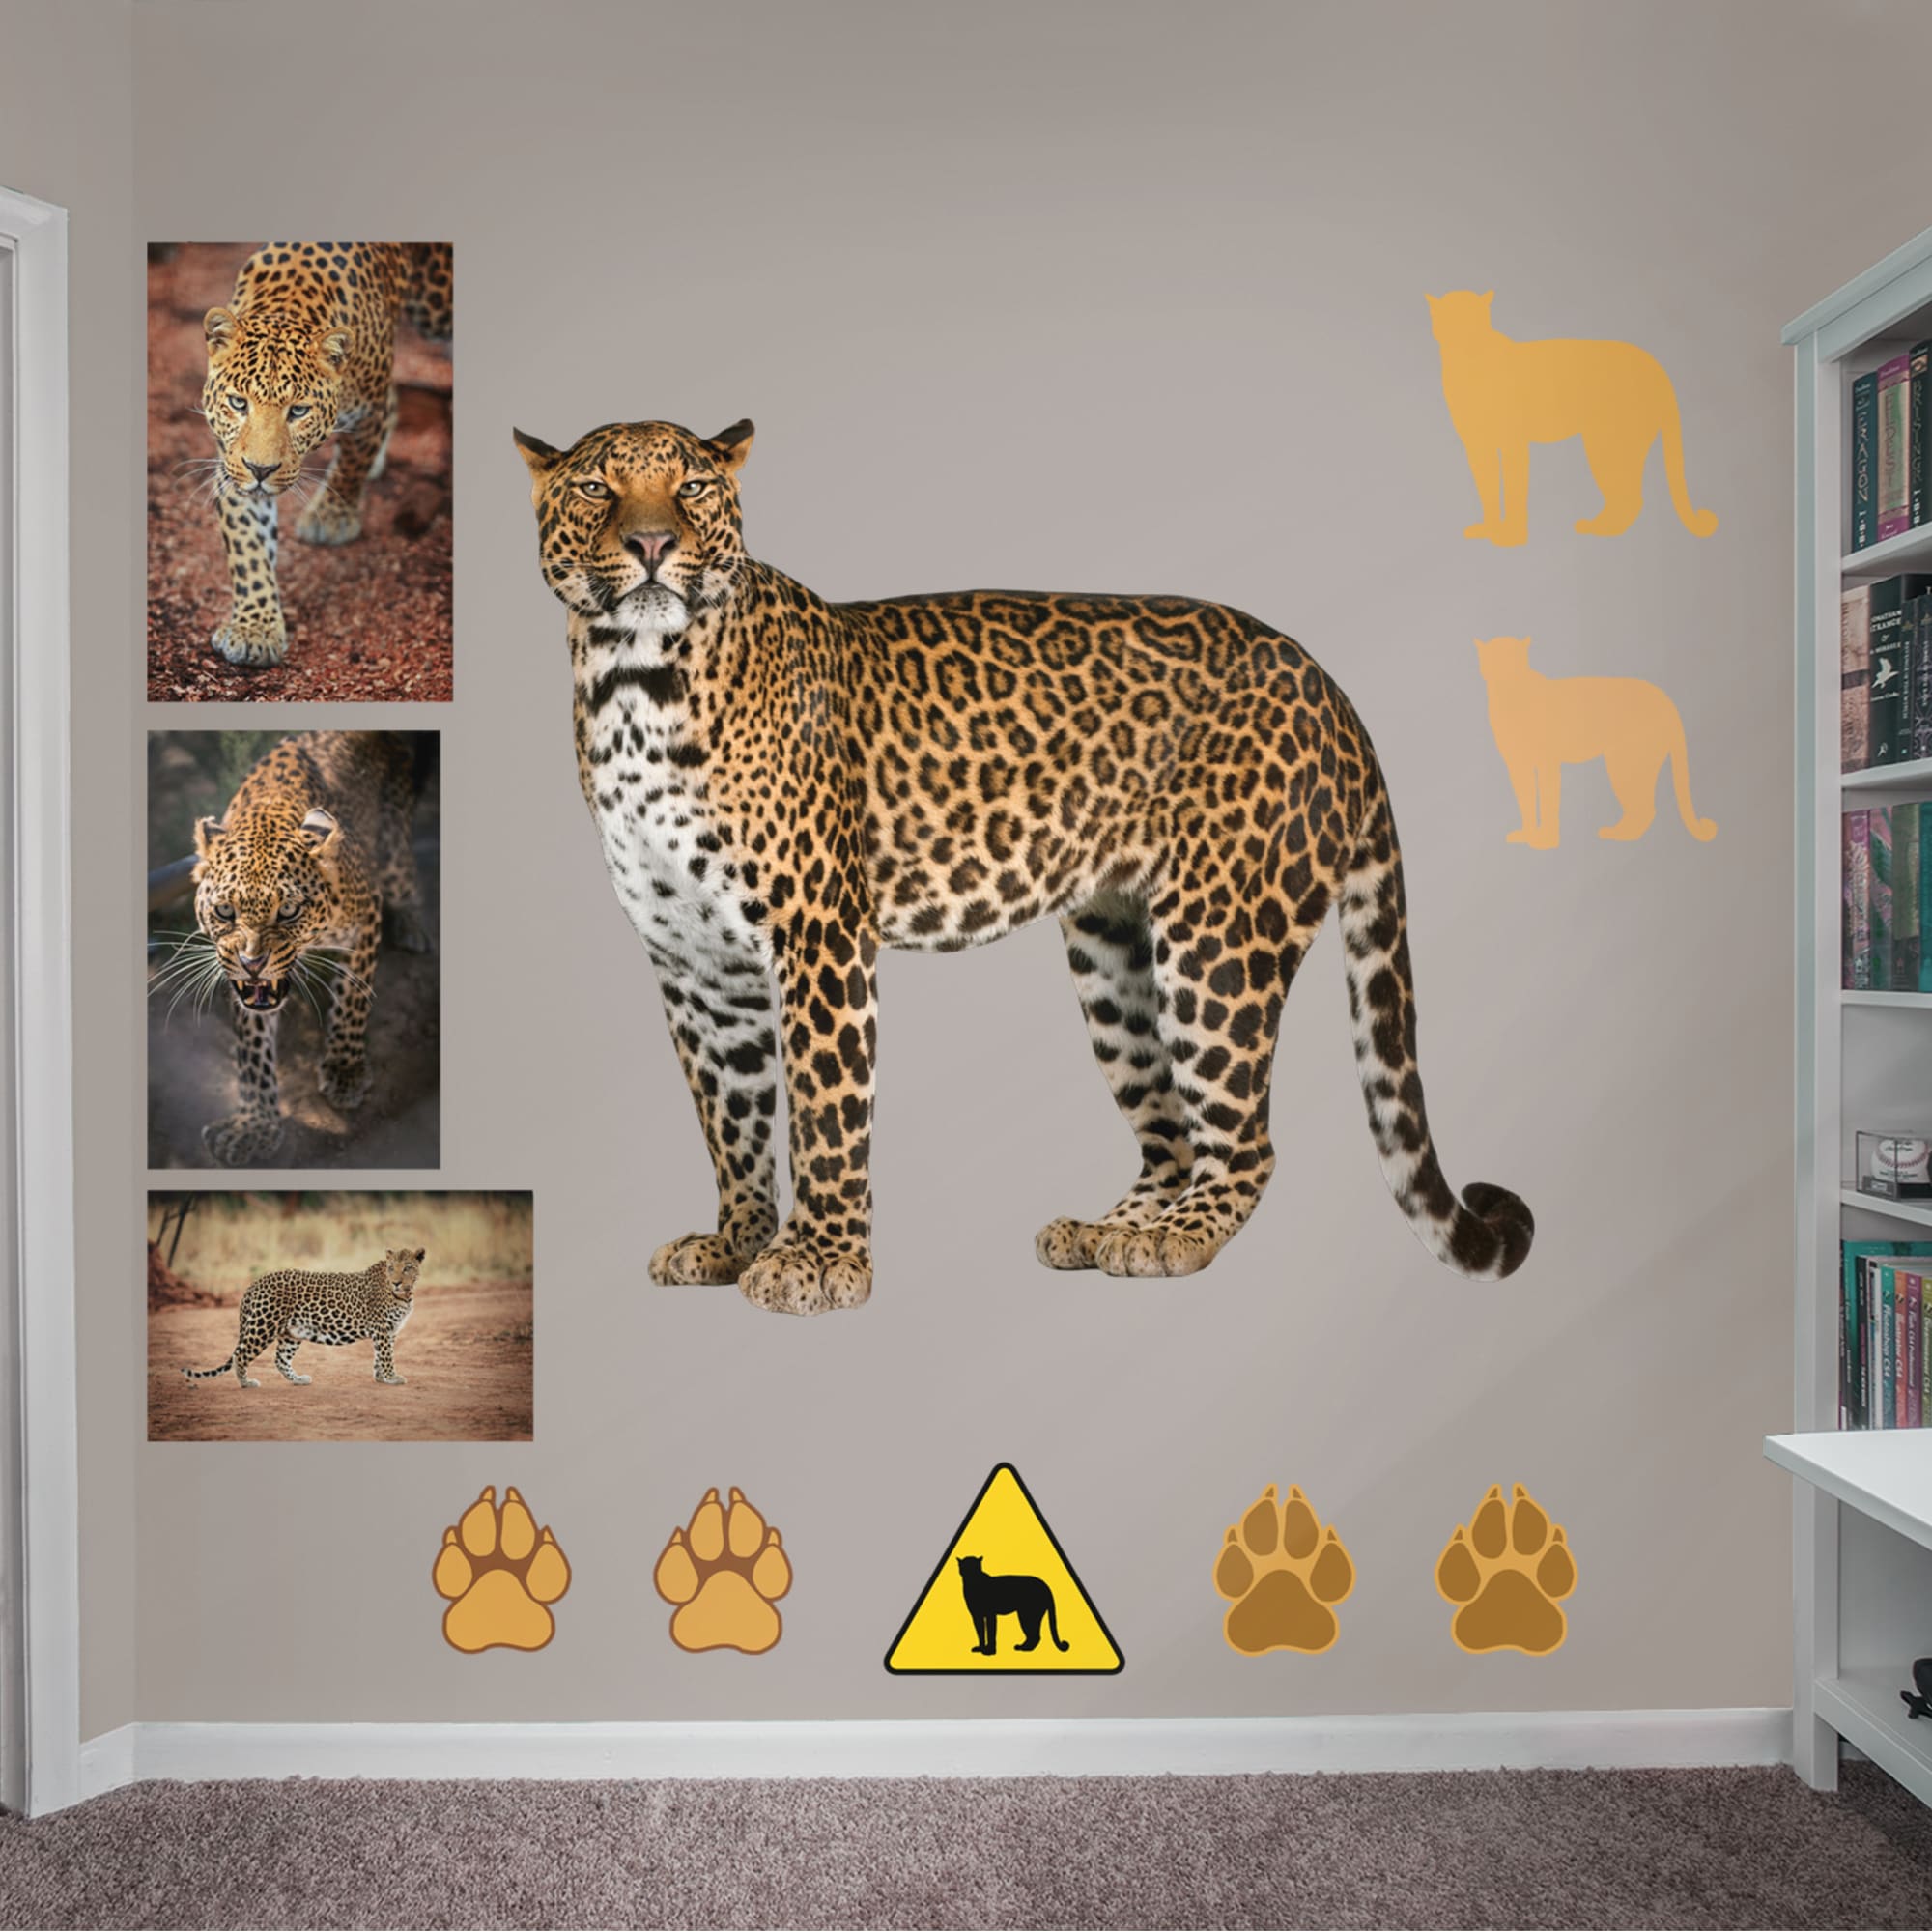 Jaguar - Removable Vinyl Decal Life-Size Animal + 10 Decals (55"W x 51"H) by Fathead